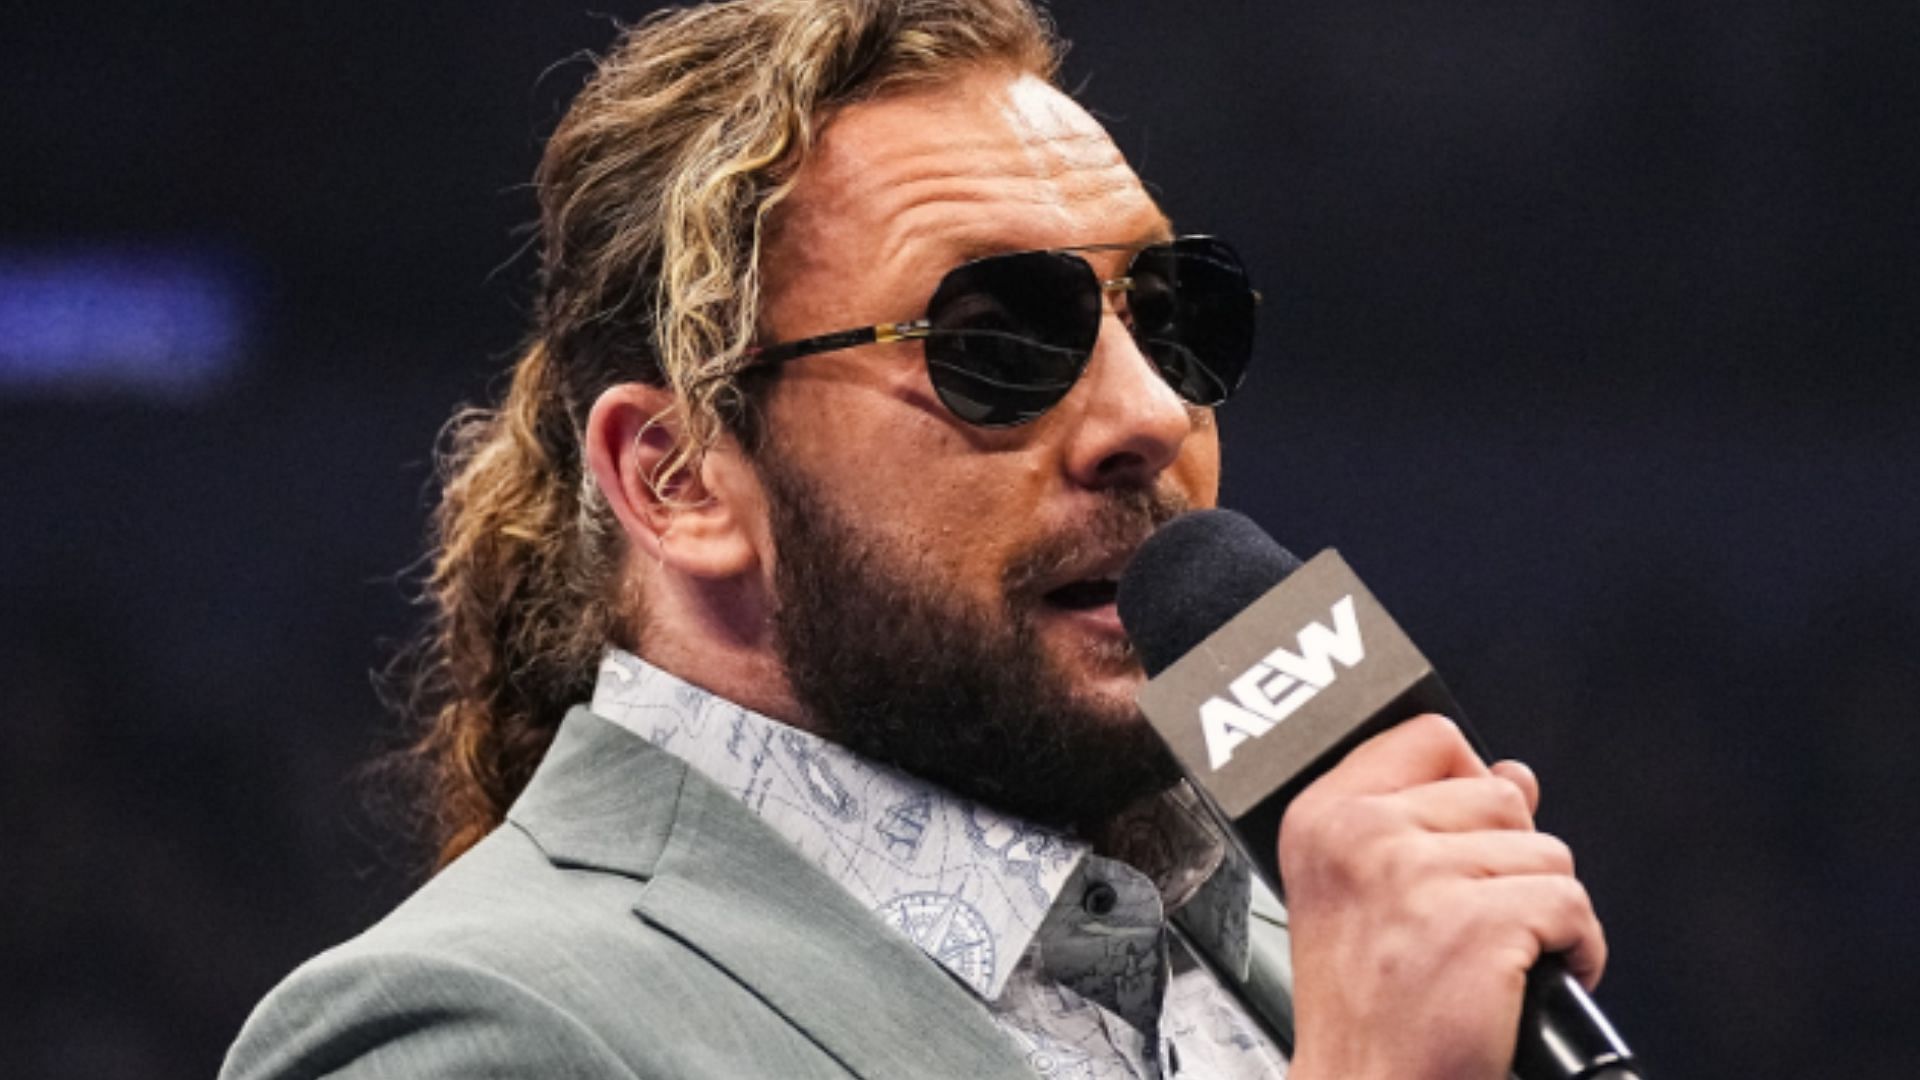 Kenny Omega returned on Dynamite this week [Image Credits: AEW